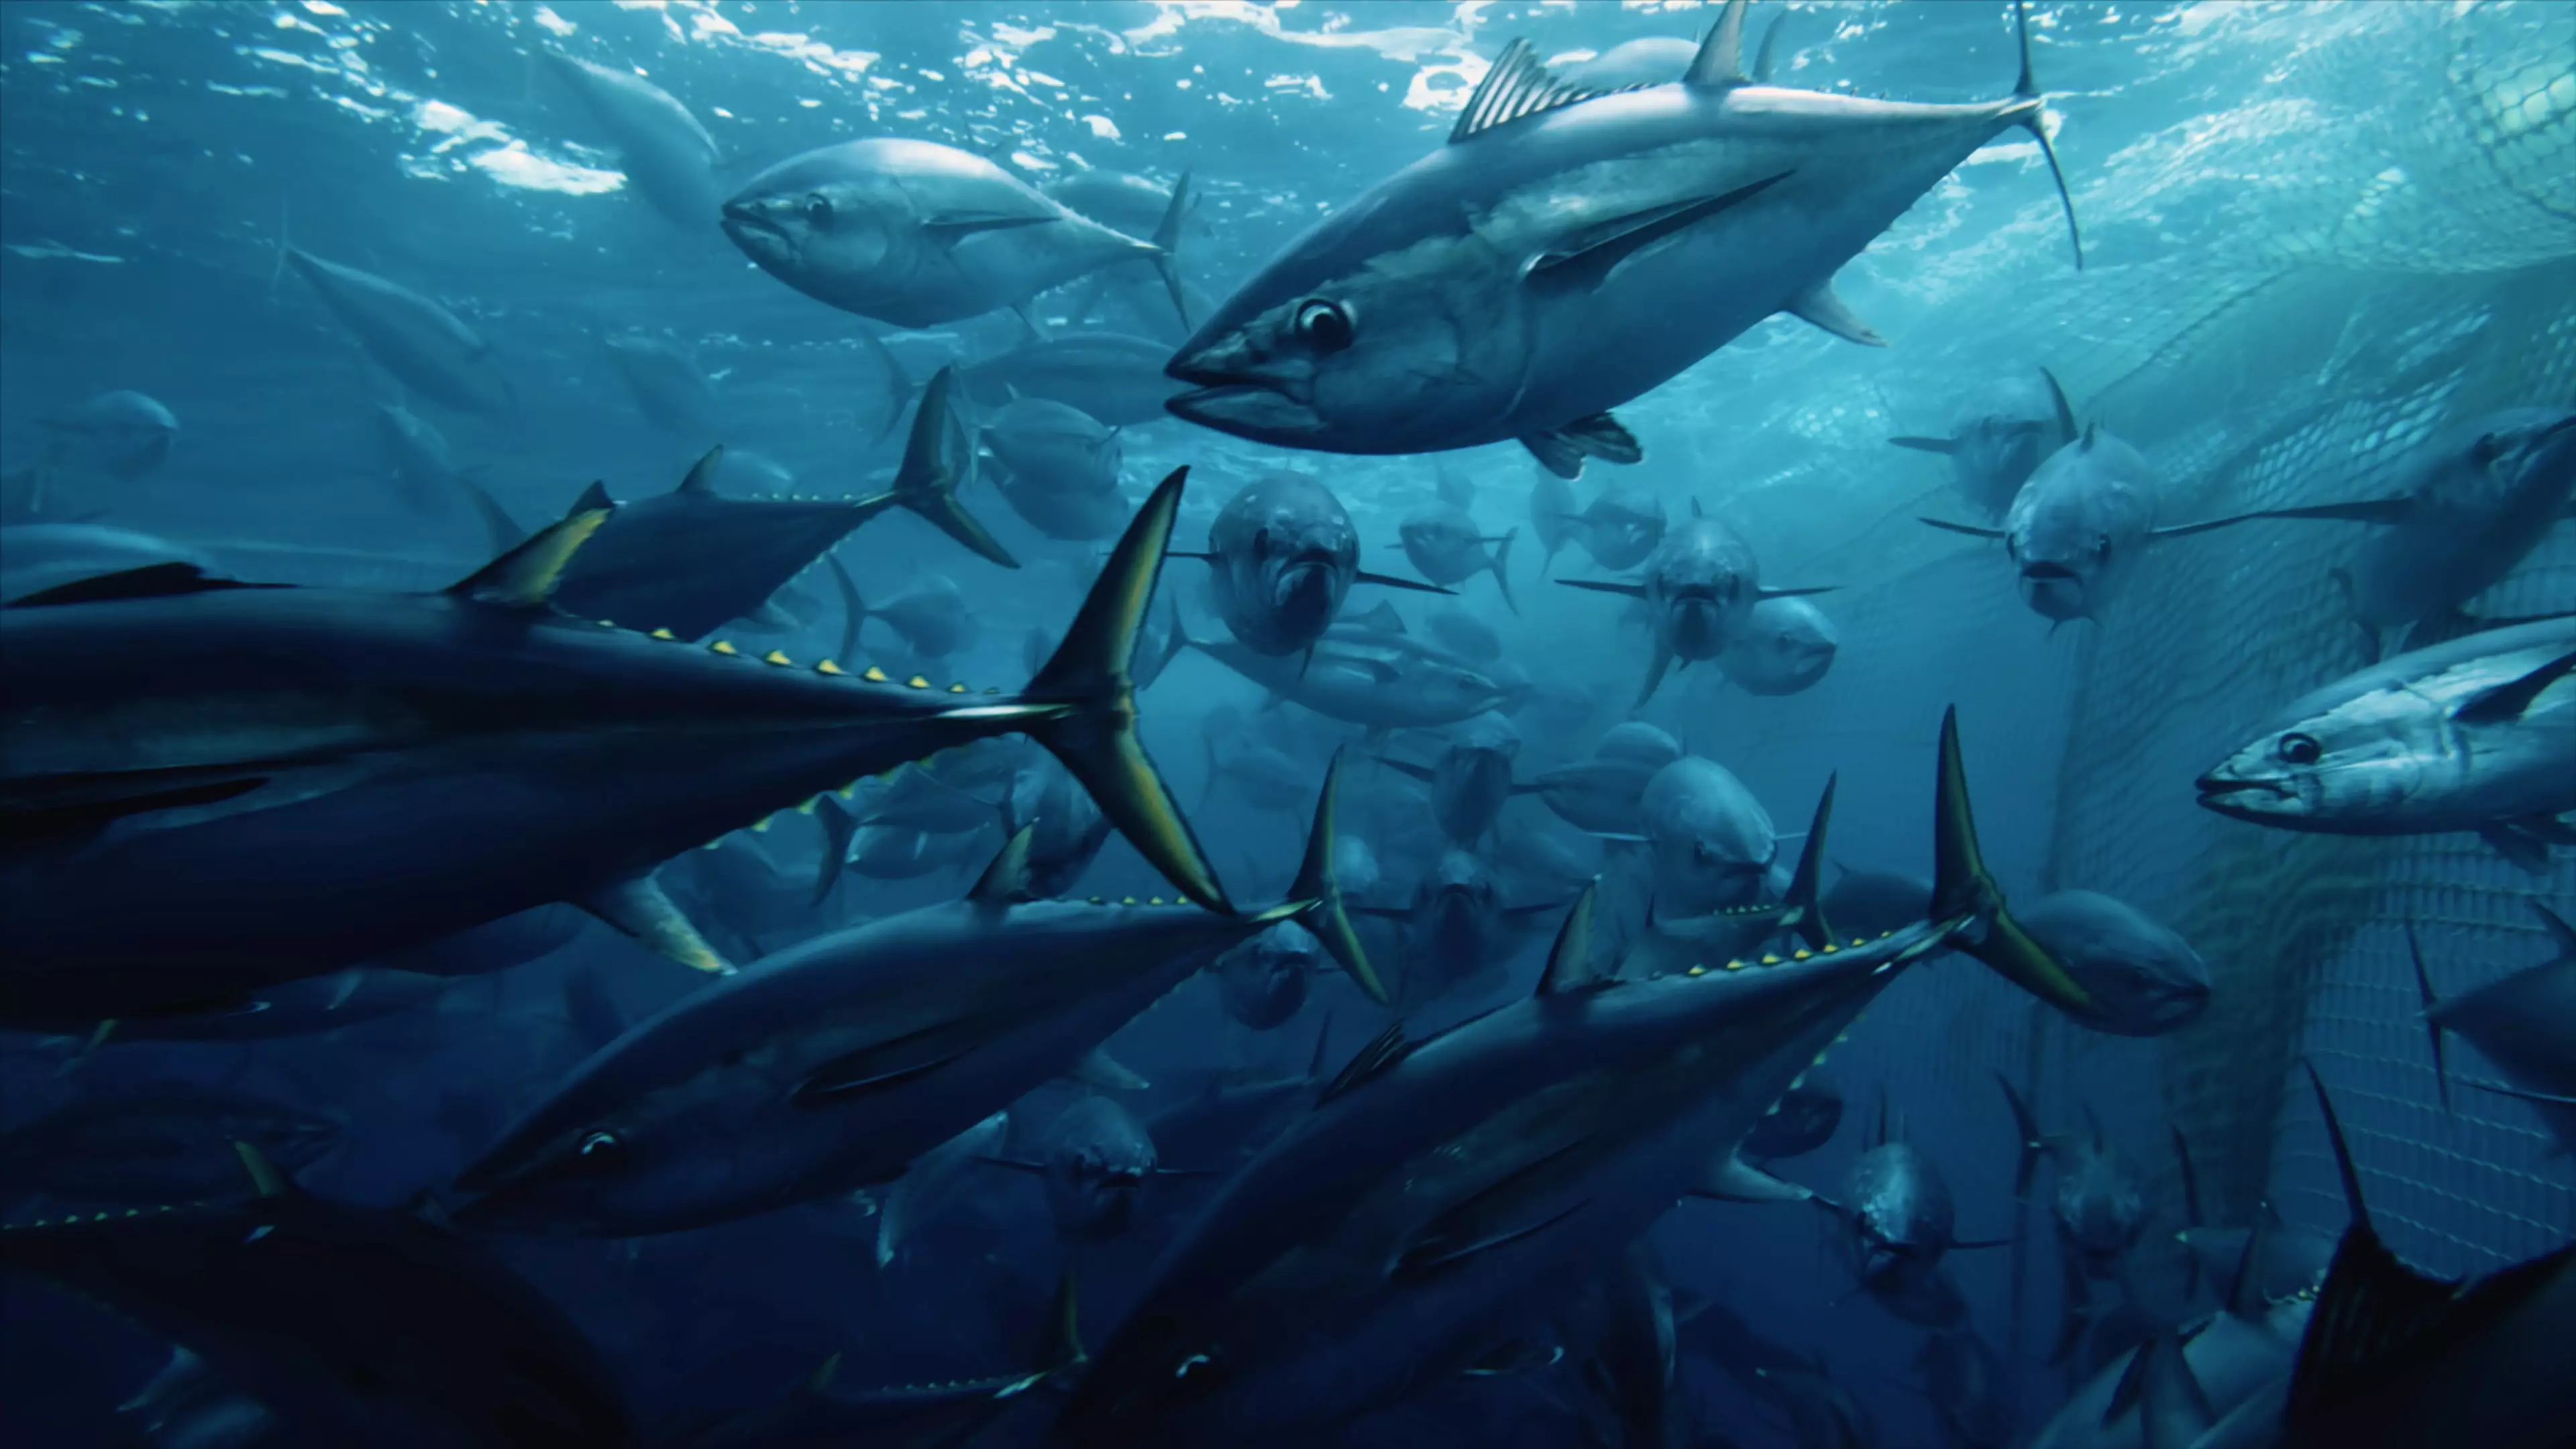 One of the issues raised was over dolphin safe tuna (